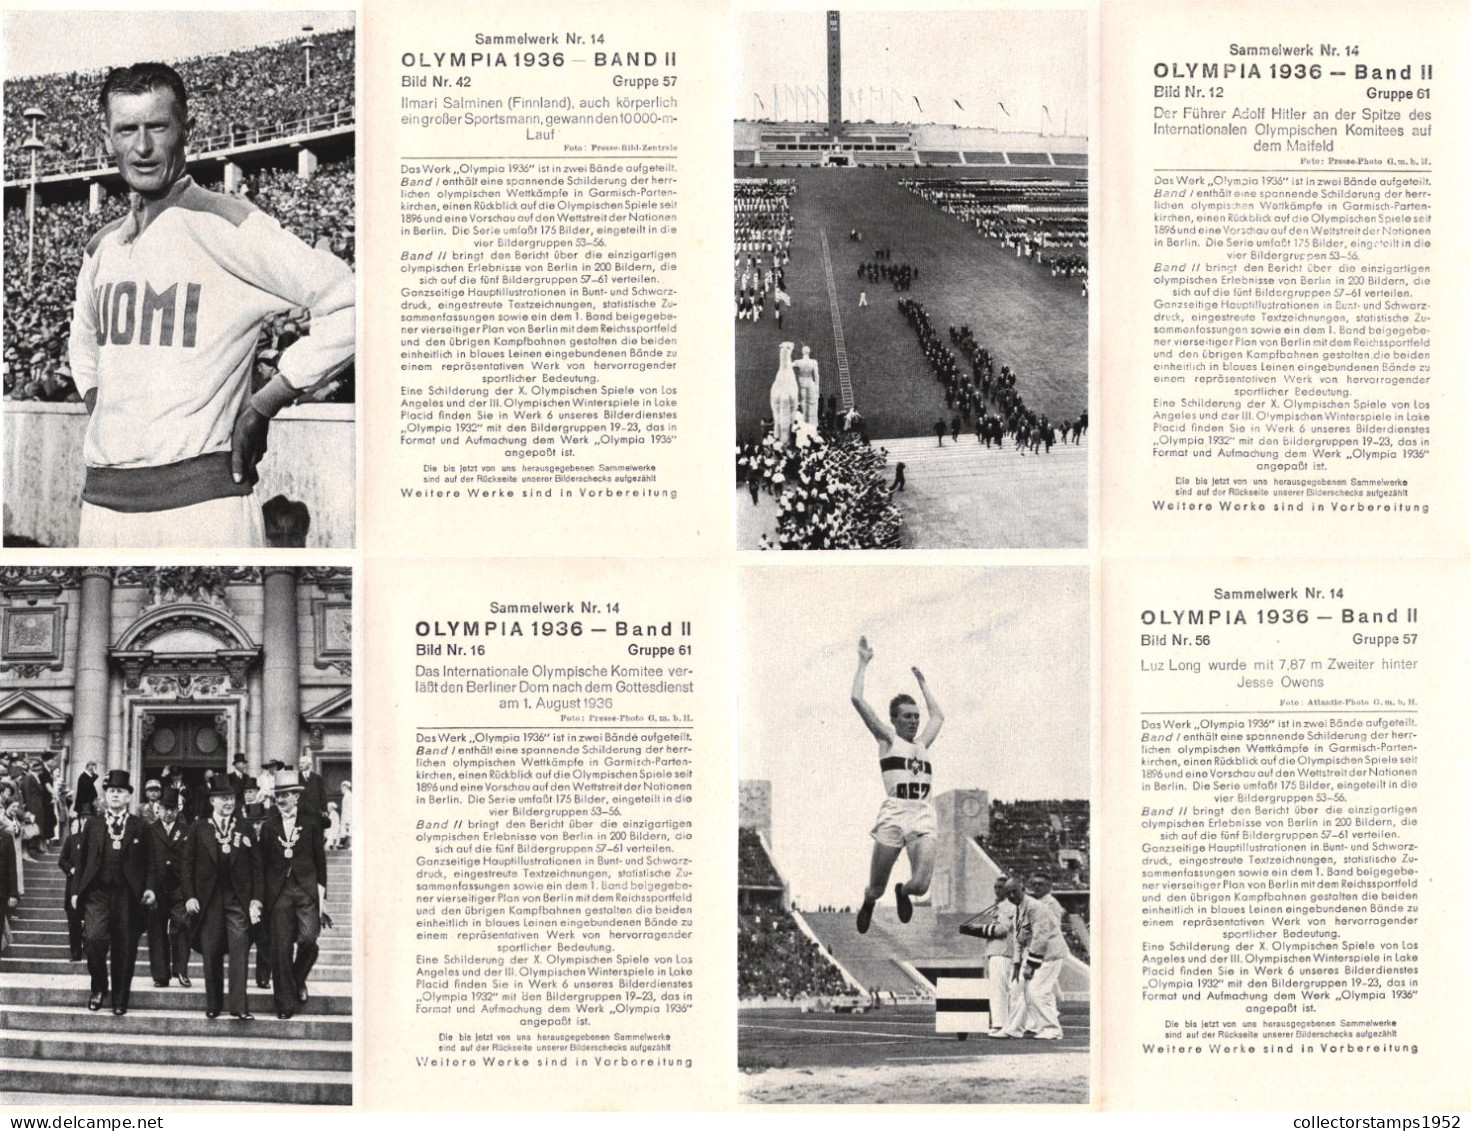 SPORTS, SET OF 71 PIECES, OLYMPIA 1936, BAND II, ED. VOL. 14., BERLIN, STADION, FLAG, BOAT, ARCHITECTURE, HORSE, GERMANY - Giochi Olimpici